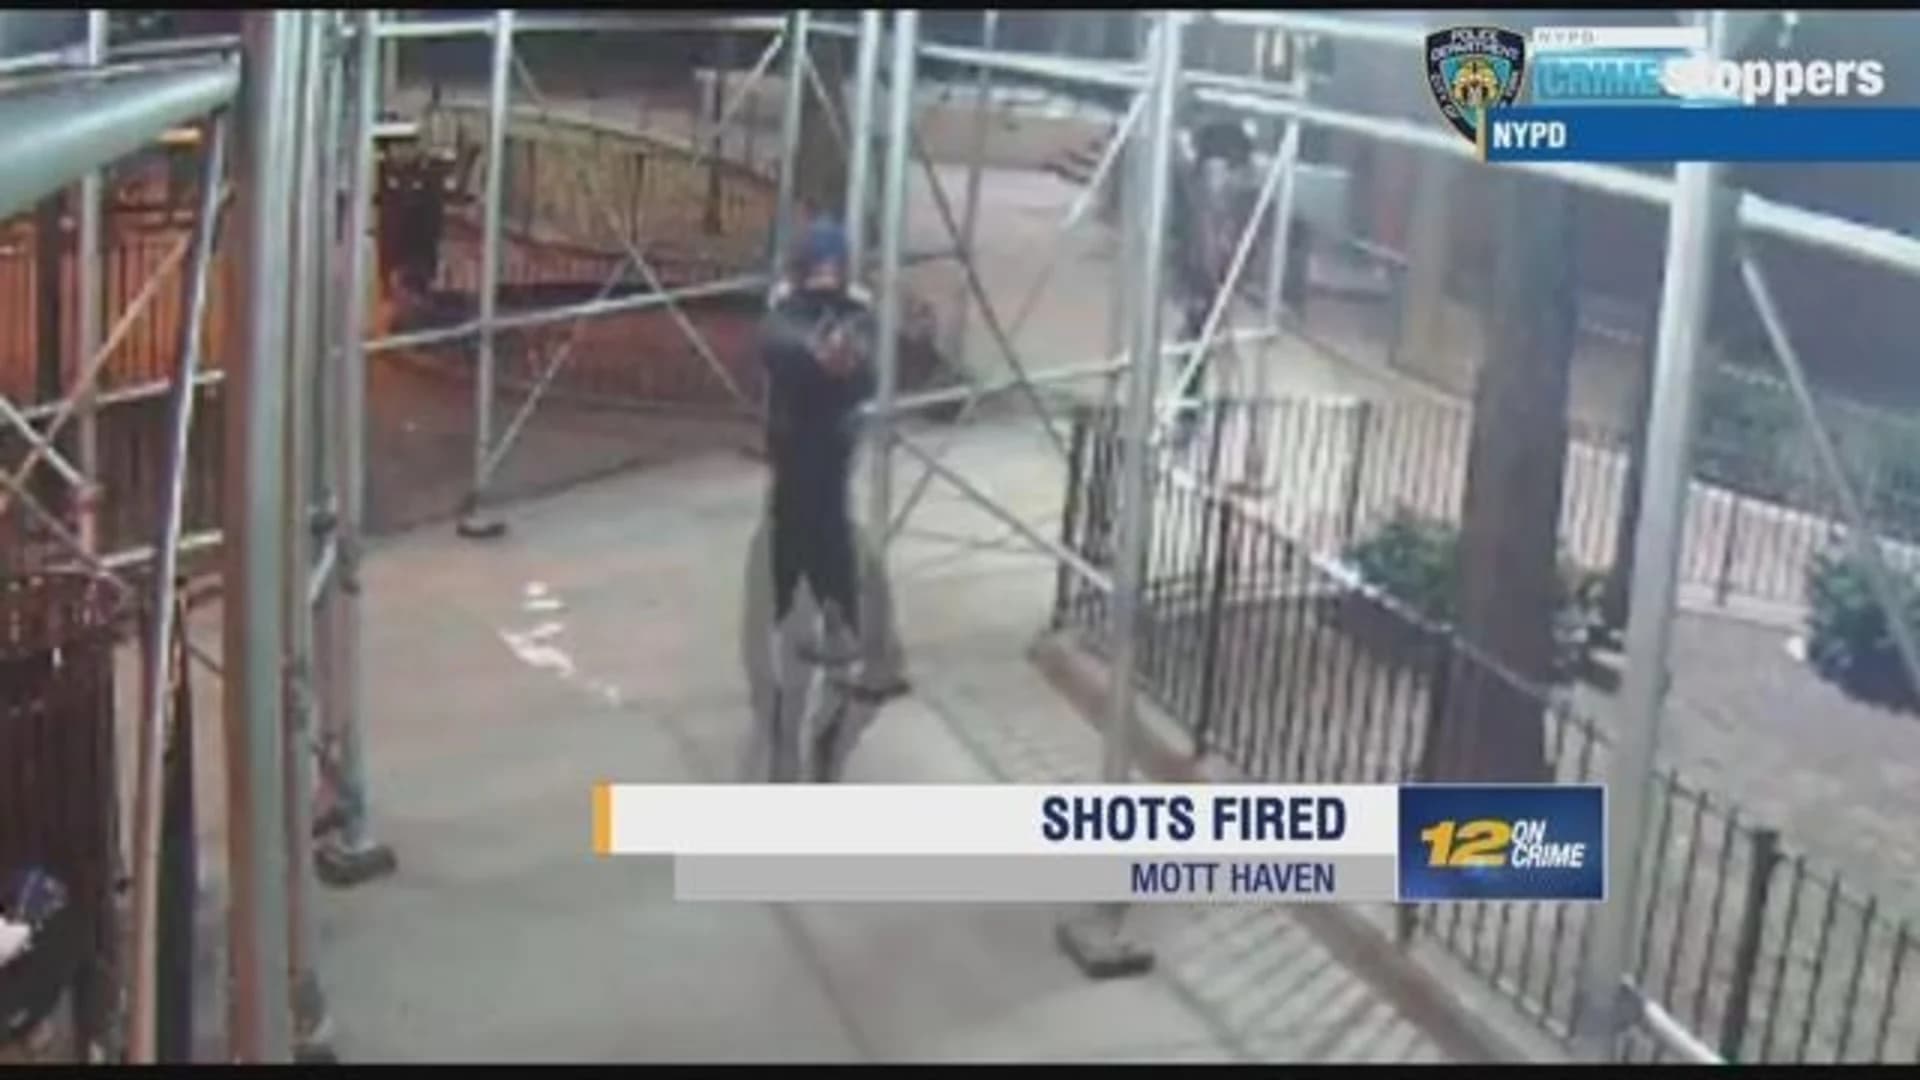 Police: Shots fired at apartment building in Mott Haven